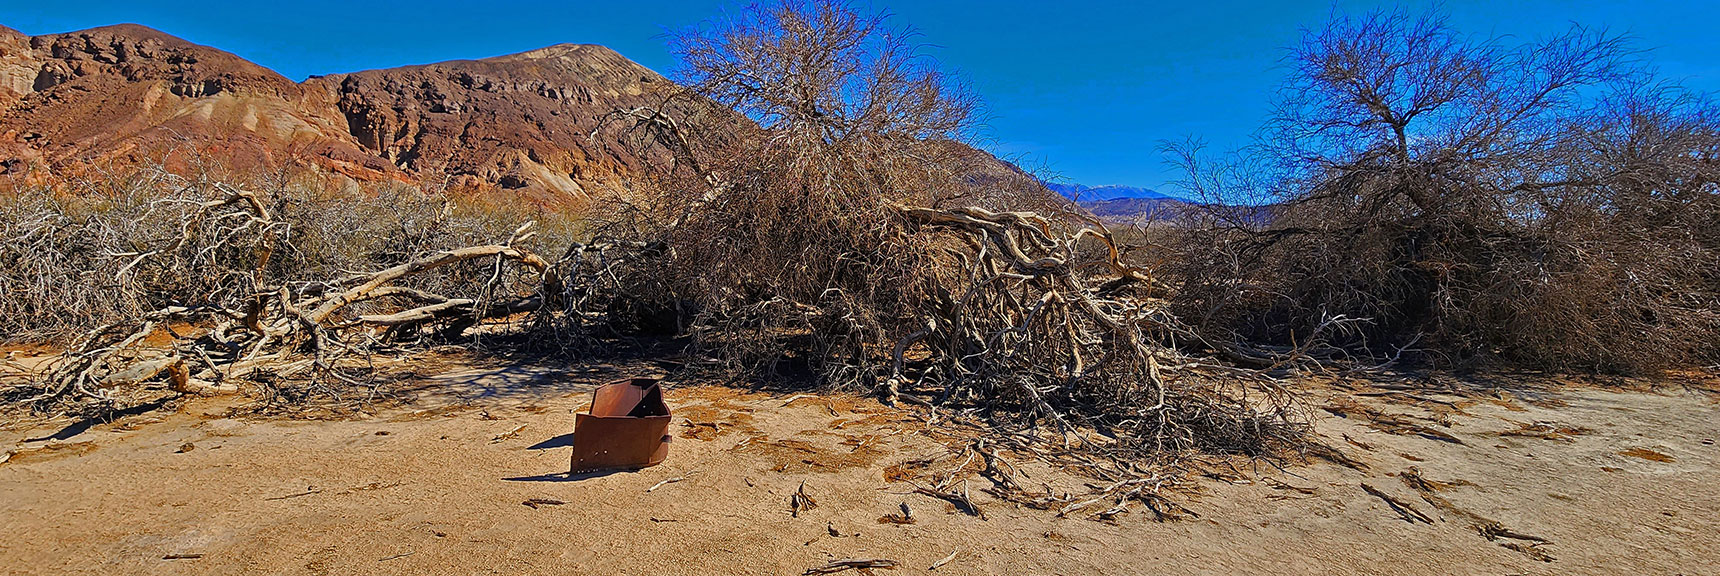 Historical Artifacts Lie Hidden in the Neglected Mesquite Grove | Mesquite Grove | Death Valley, California | David Smith | Las Vegas Area Trails